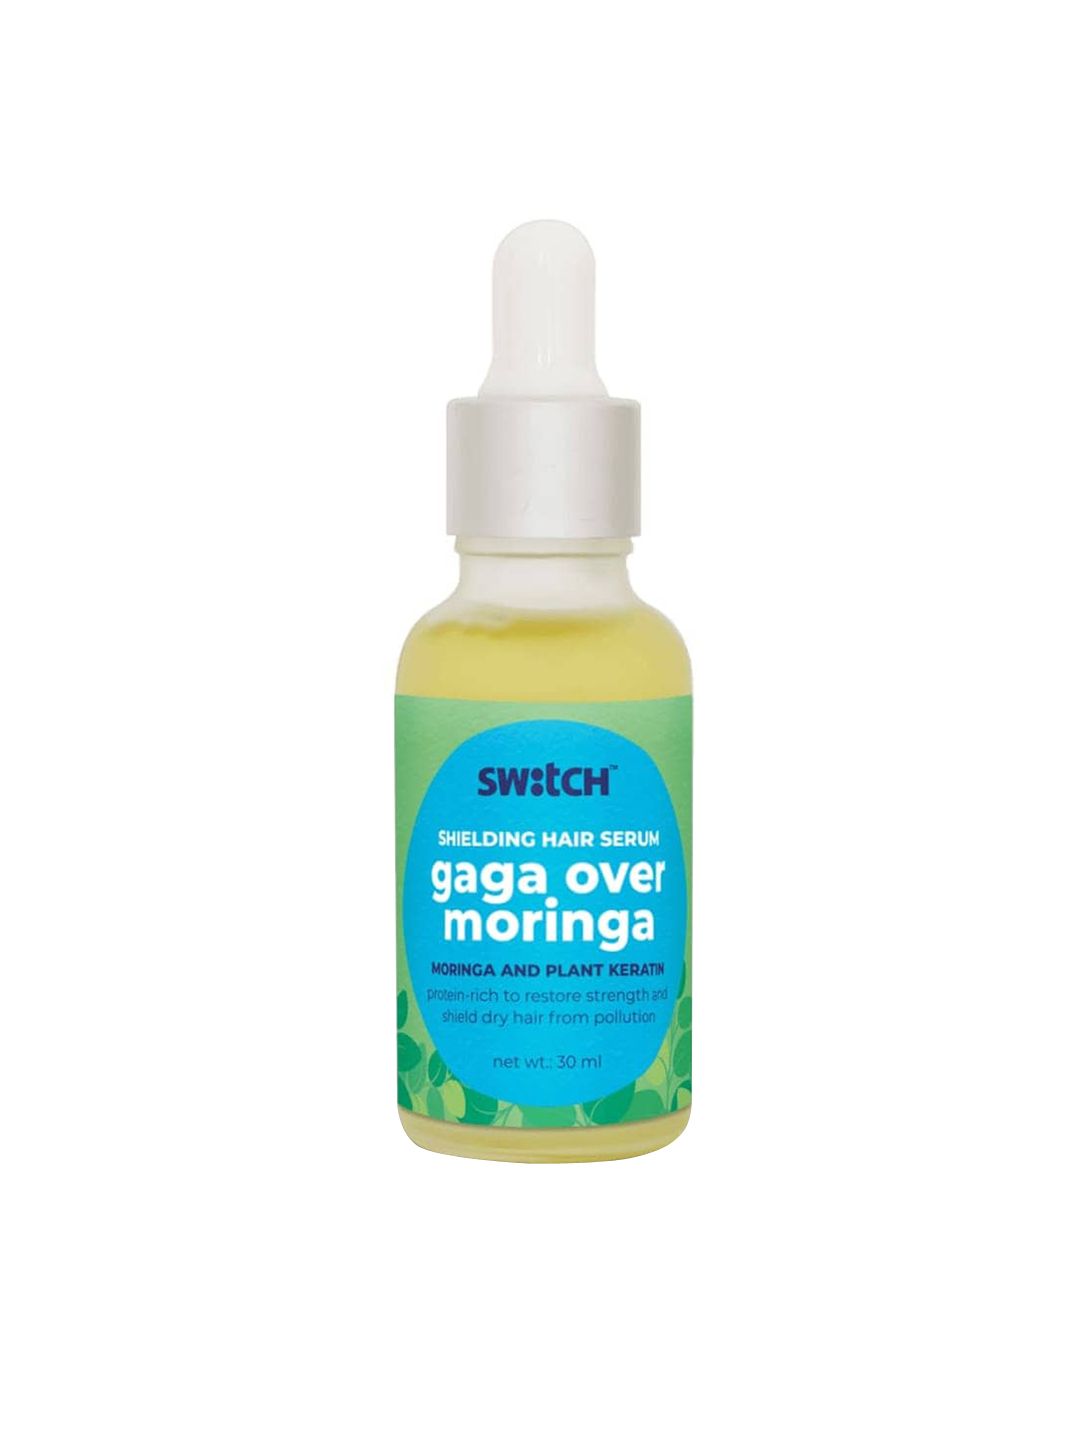 The Switch Fix Sheilding Gaga Over Moringa Hair Serum for Dry hair - 30ml Price in India